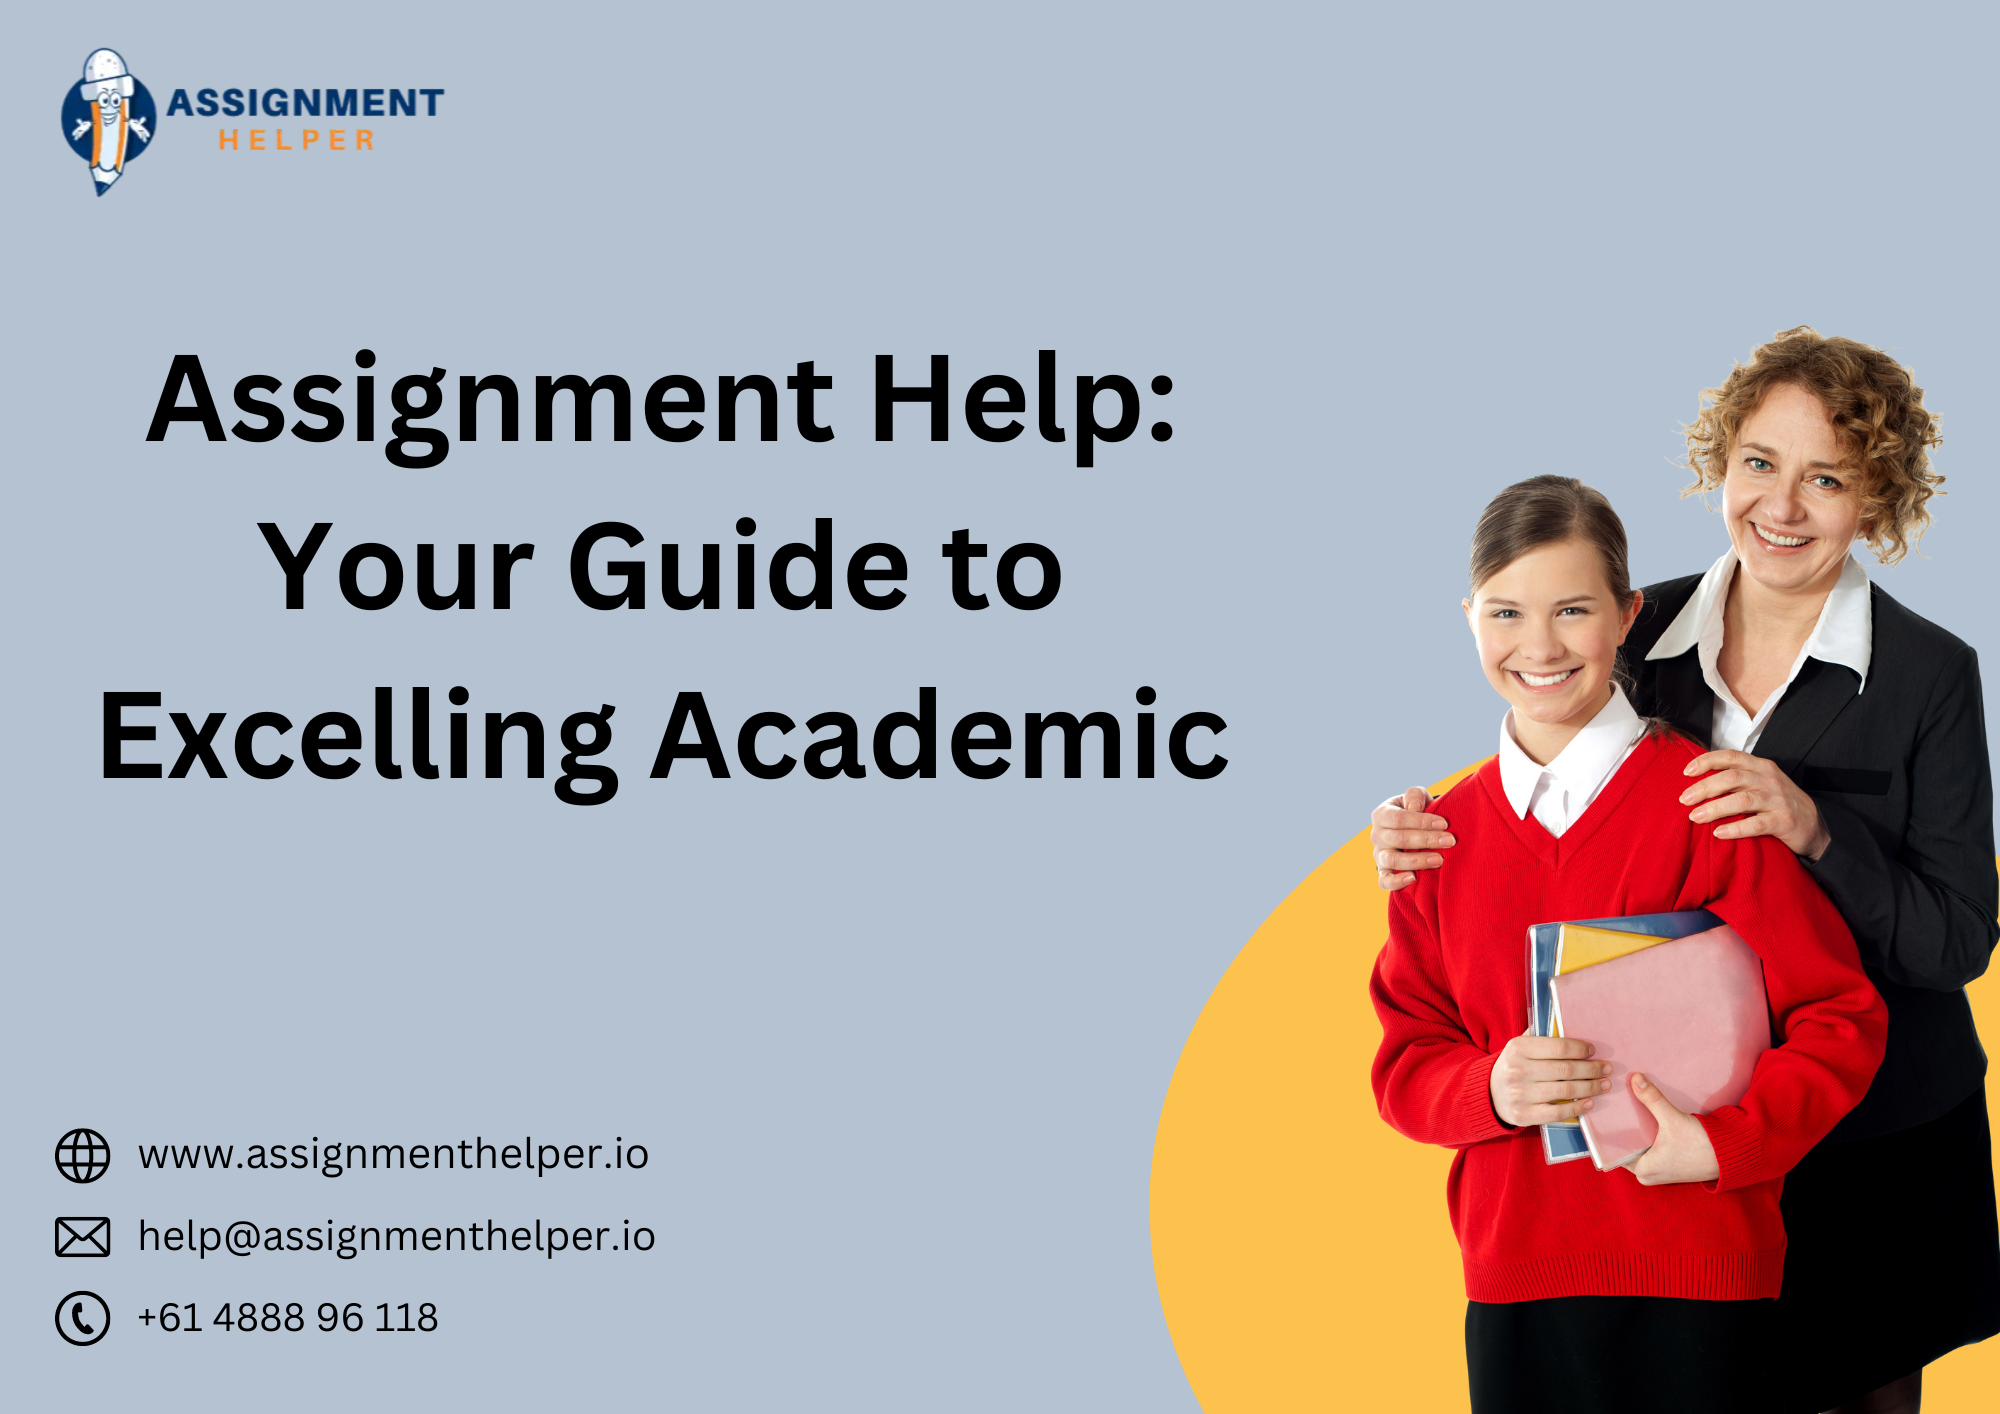 Assignment Help: Your Guide to Excelling Academic